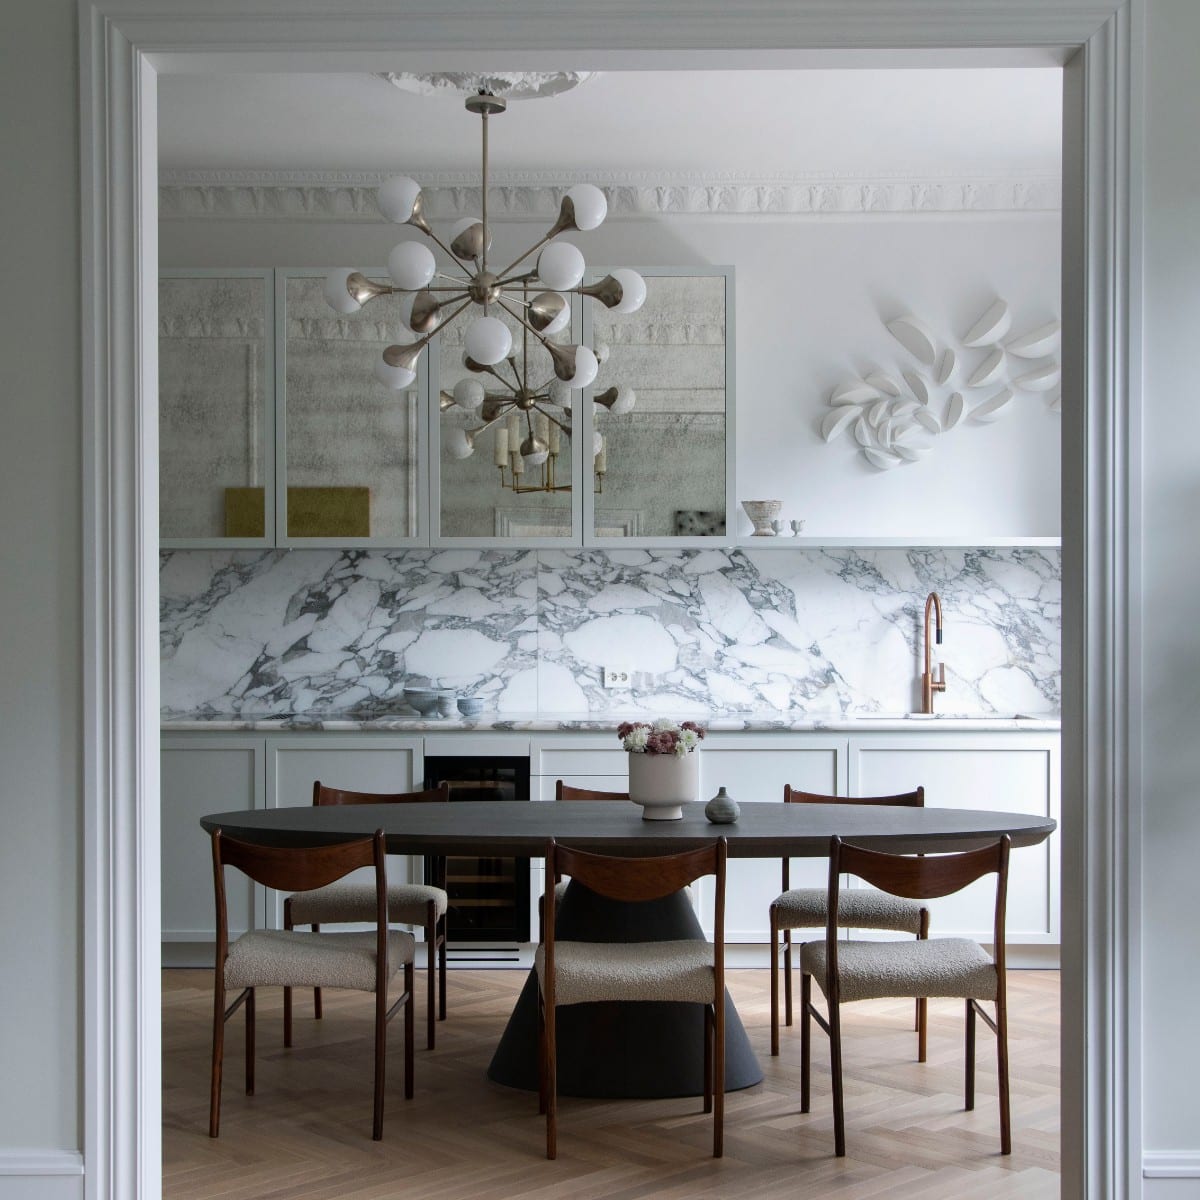 Get+Inspired%3A+White+Marble+Kitchen+with+a+European+Twist